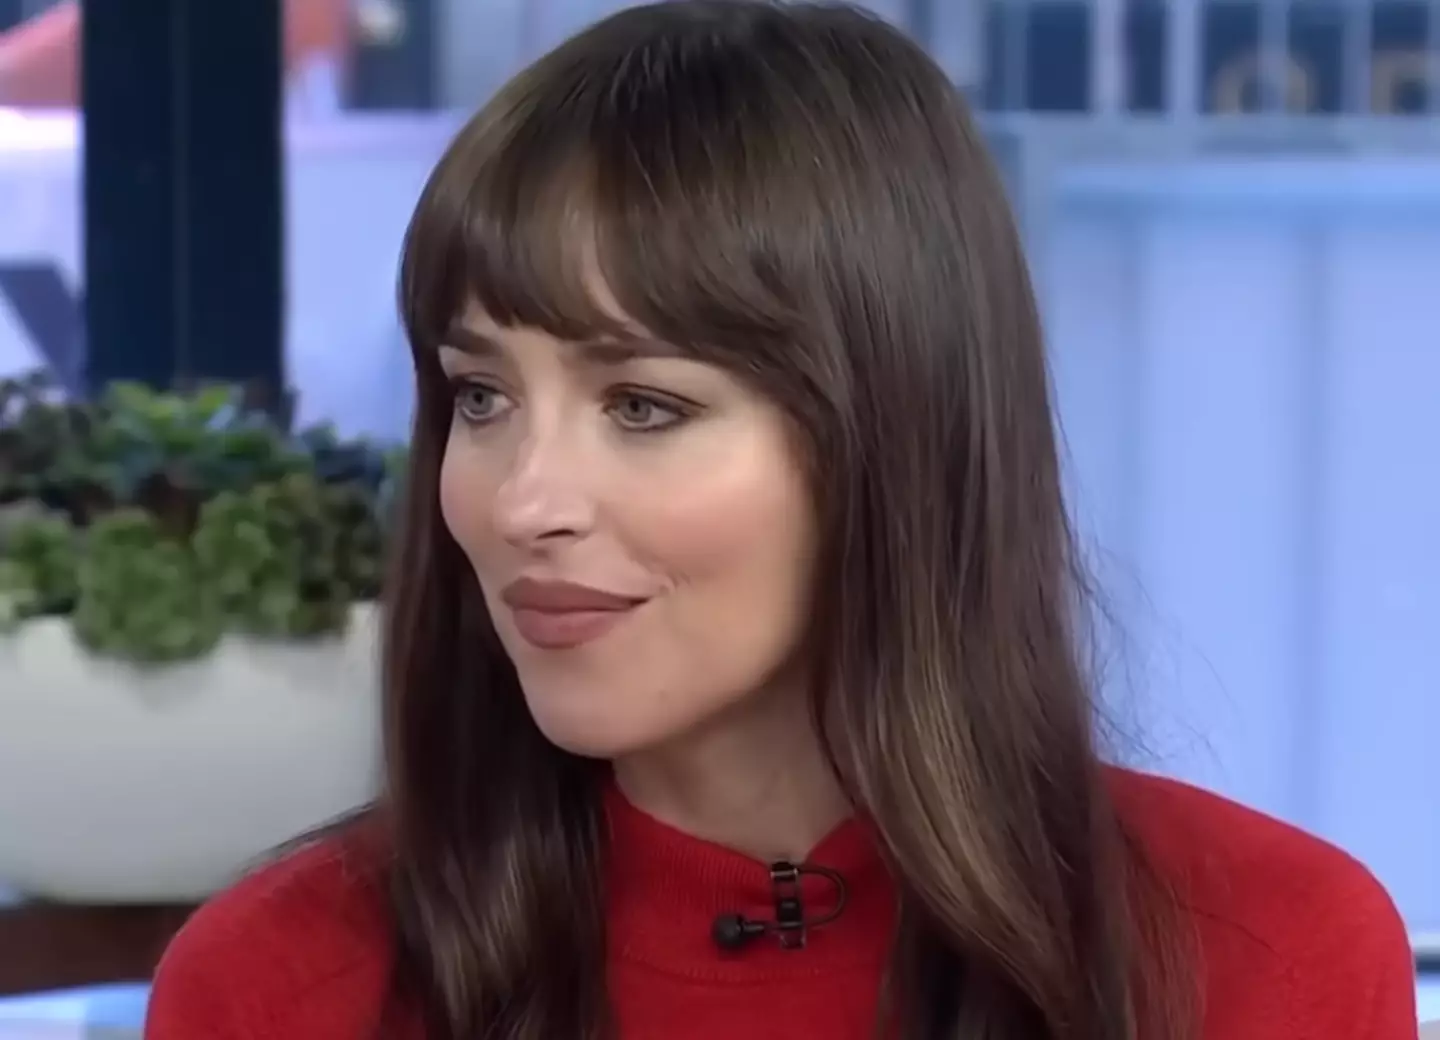 Dakota Johnson said her parents encouraged her to make it in Hollywood by herself.